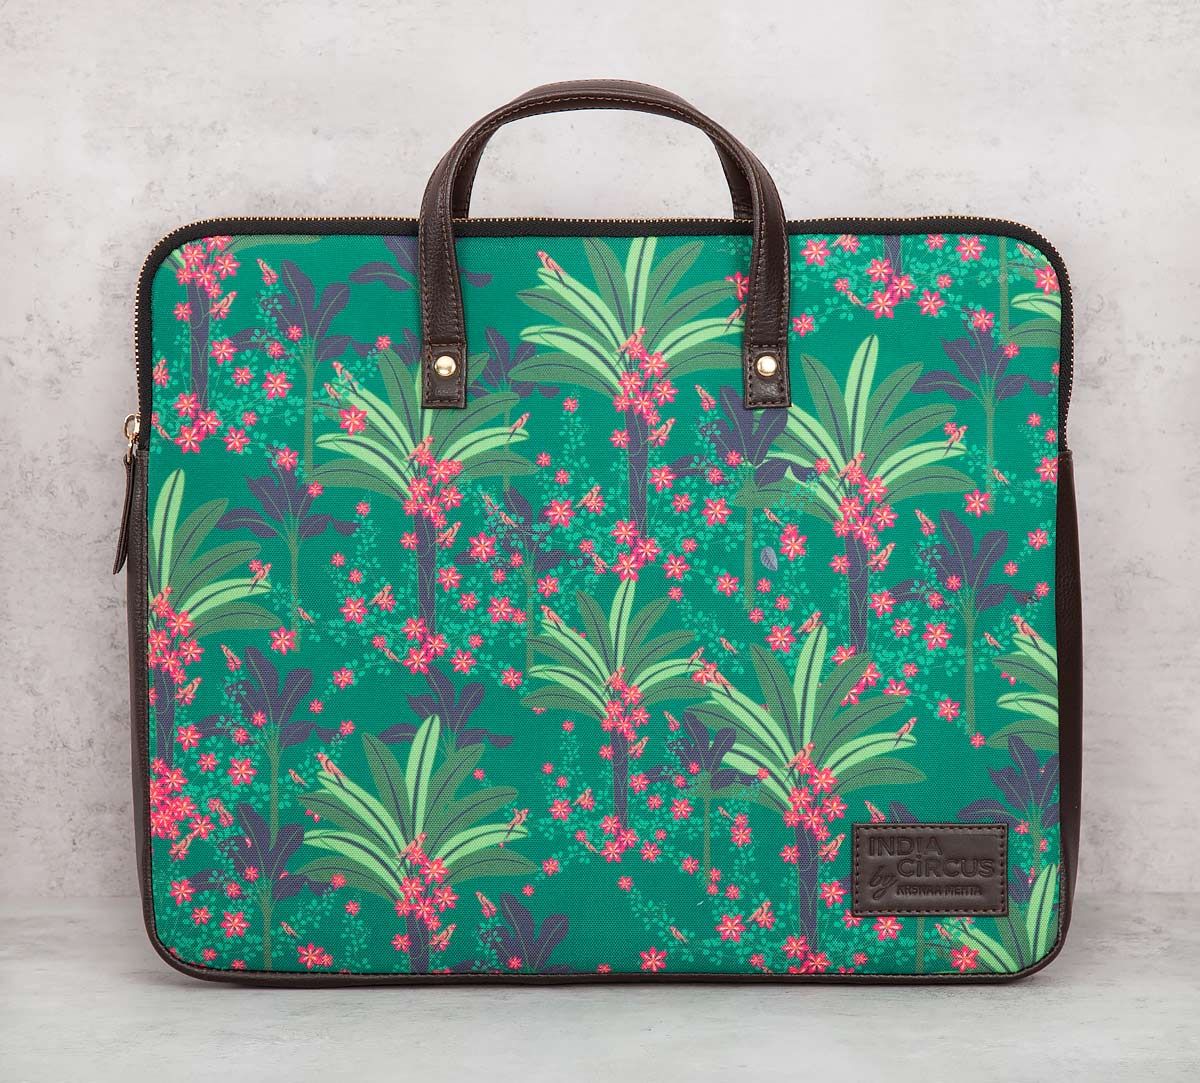 Shop for stylish ladies laptop bags online | India Circus